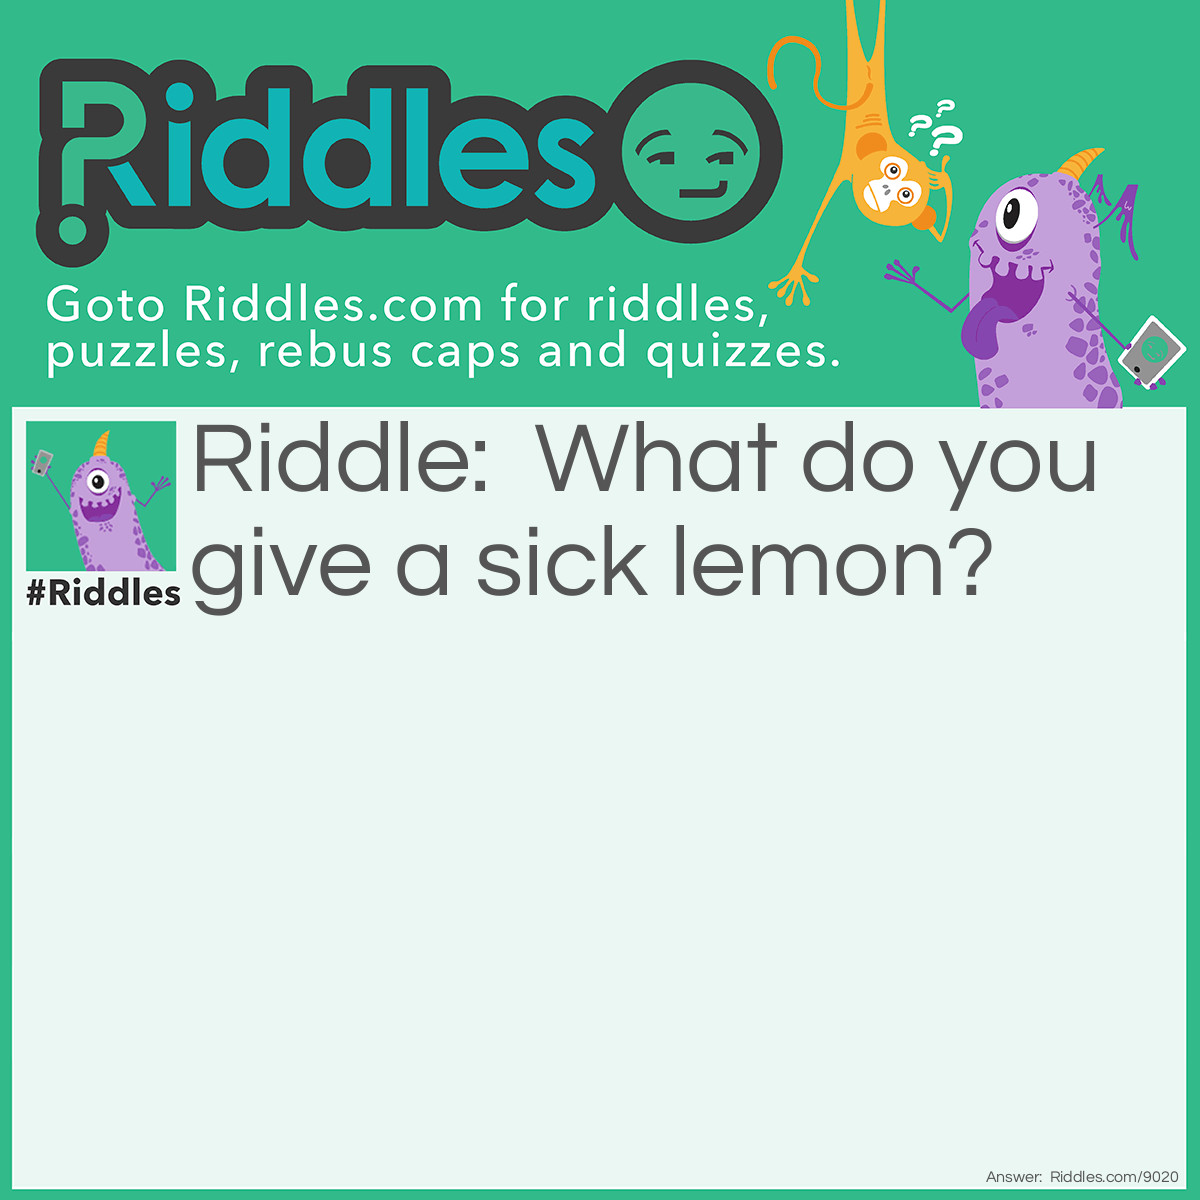 Riddle: What do you give a sick lemon? Answer: A cup of lemonade!